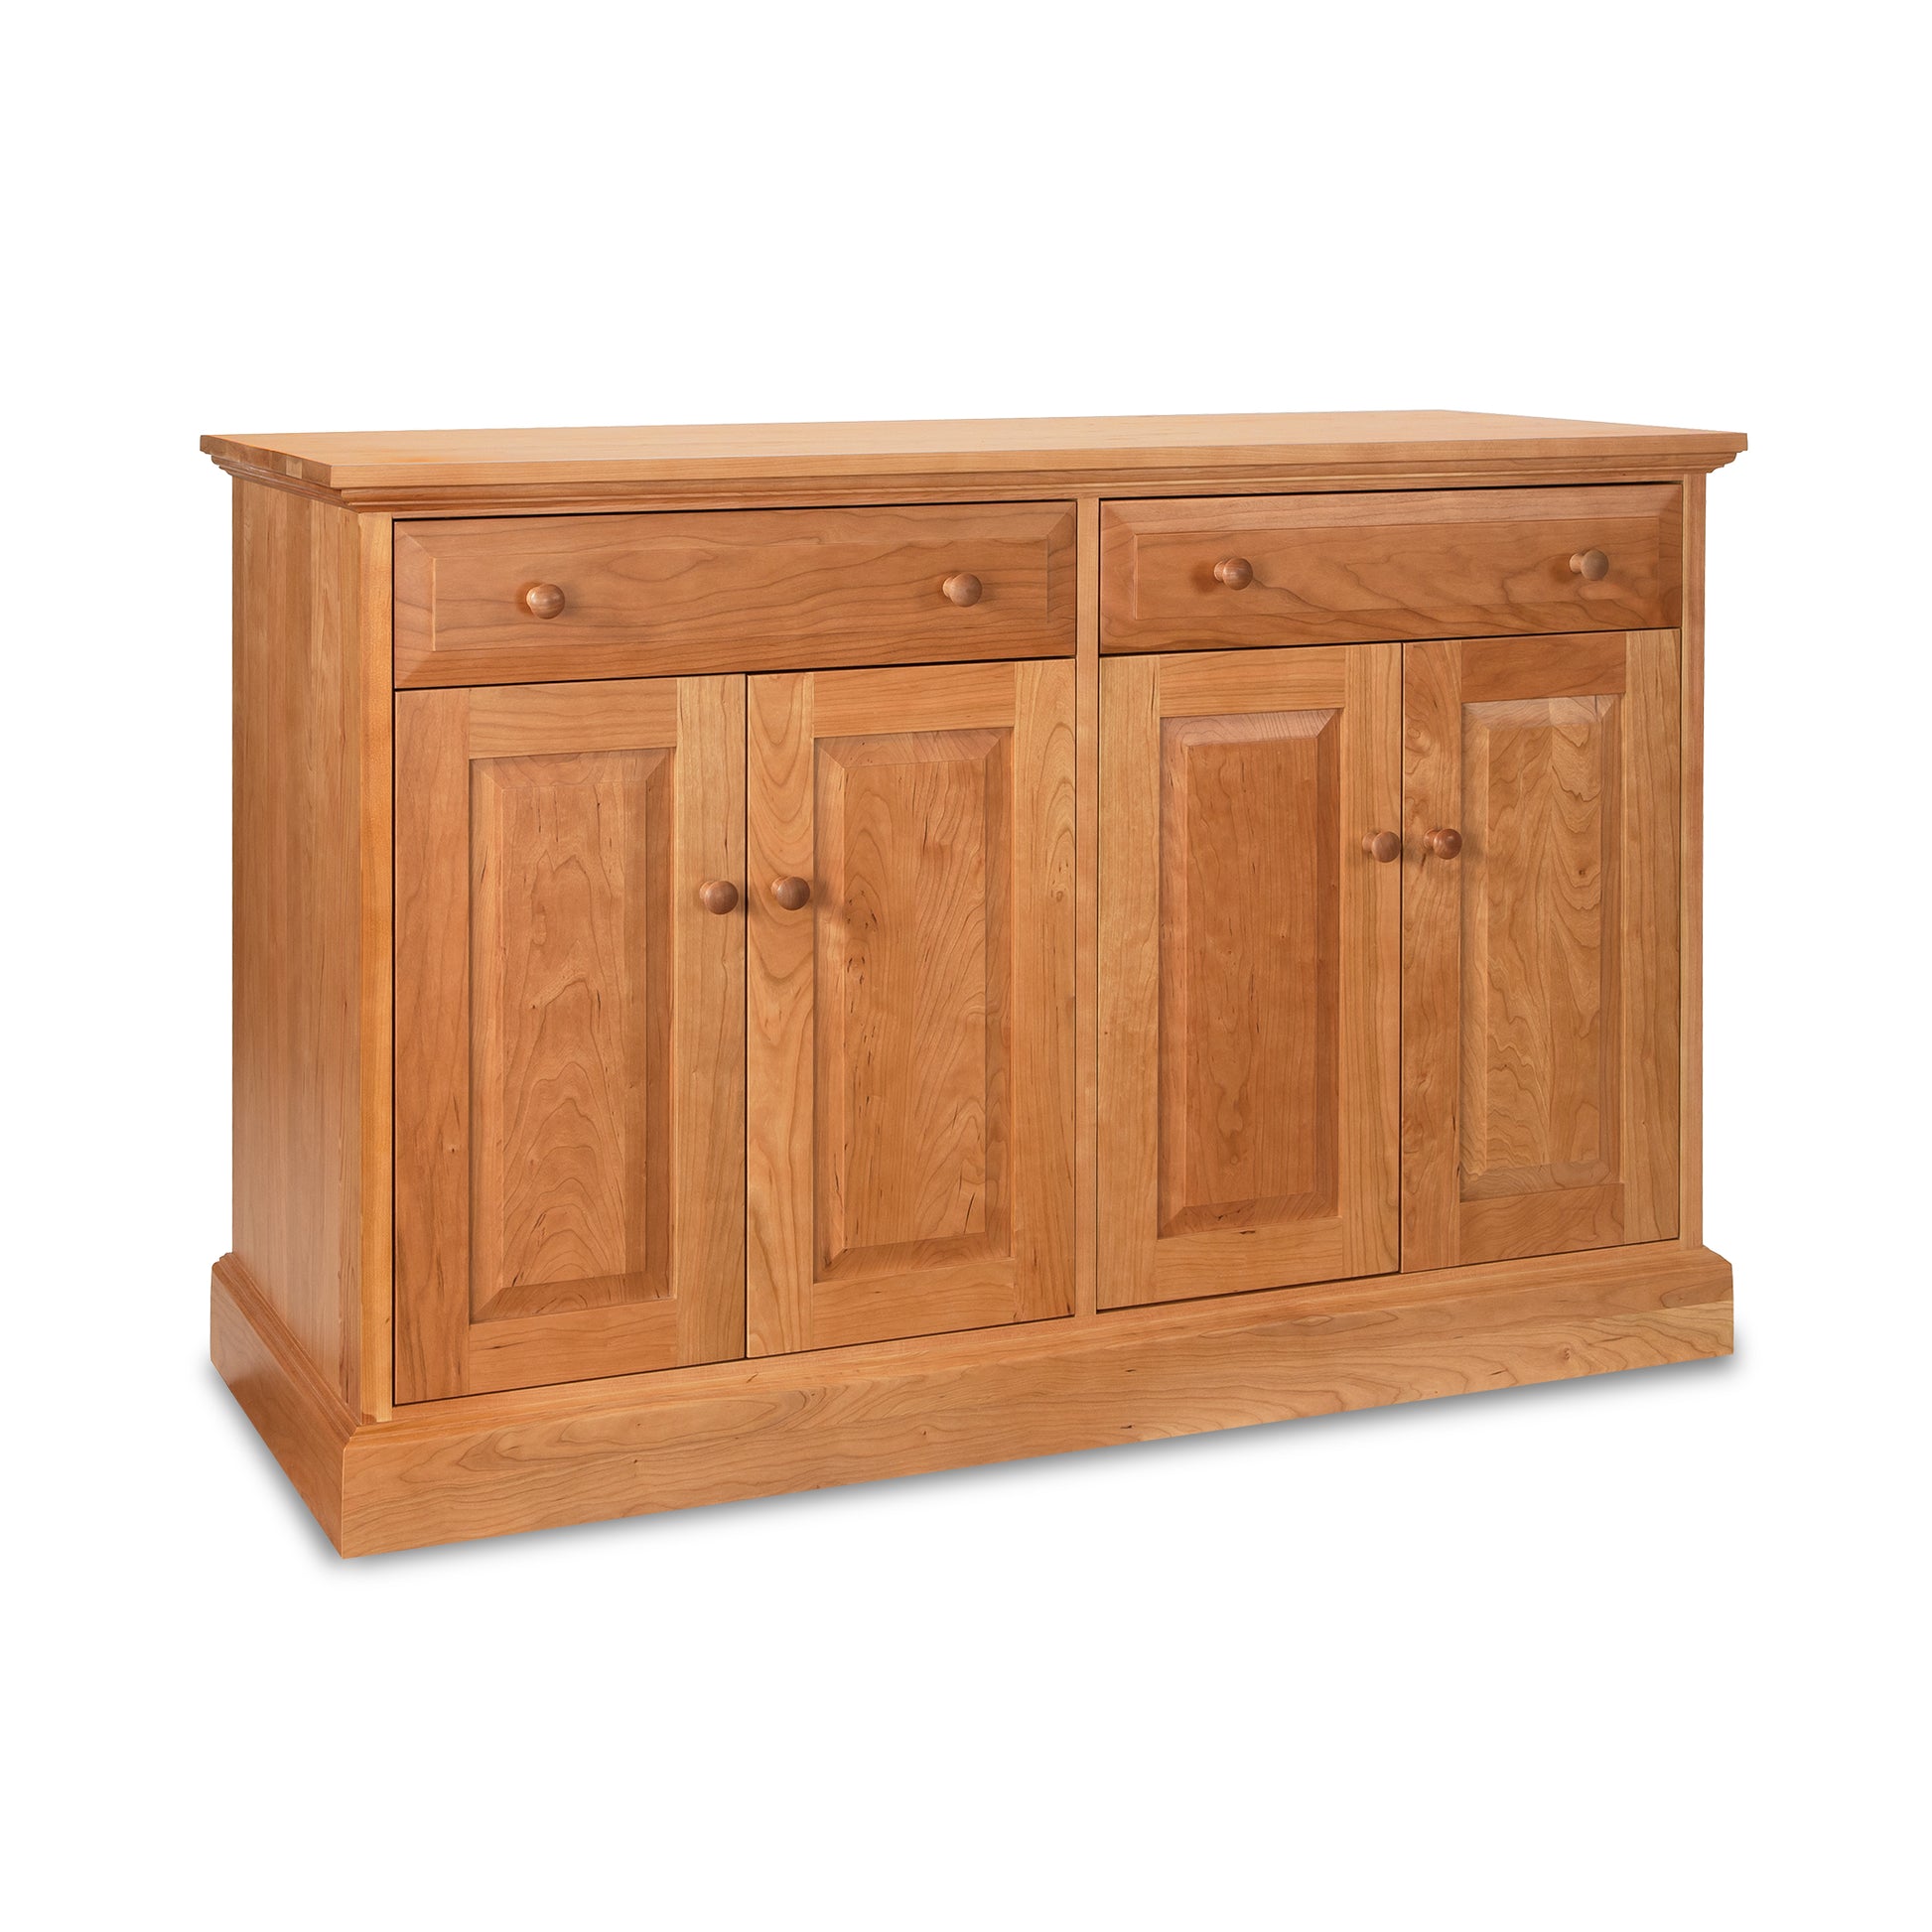 A New England Shaker Buffet by Lyndon Furniture with two doors and two drawers, perfect for dining room storage or as a buffet sideboard.